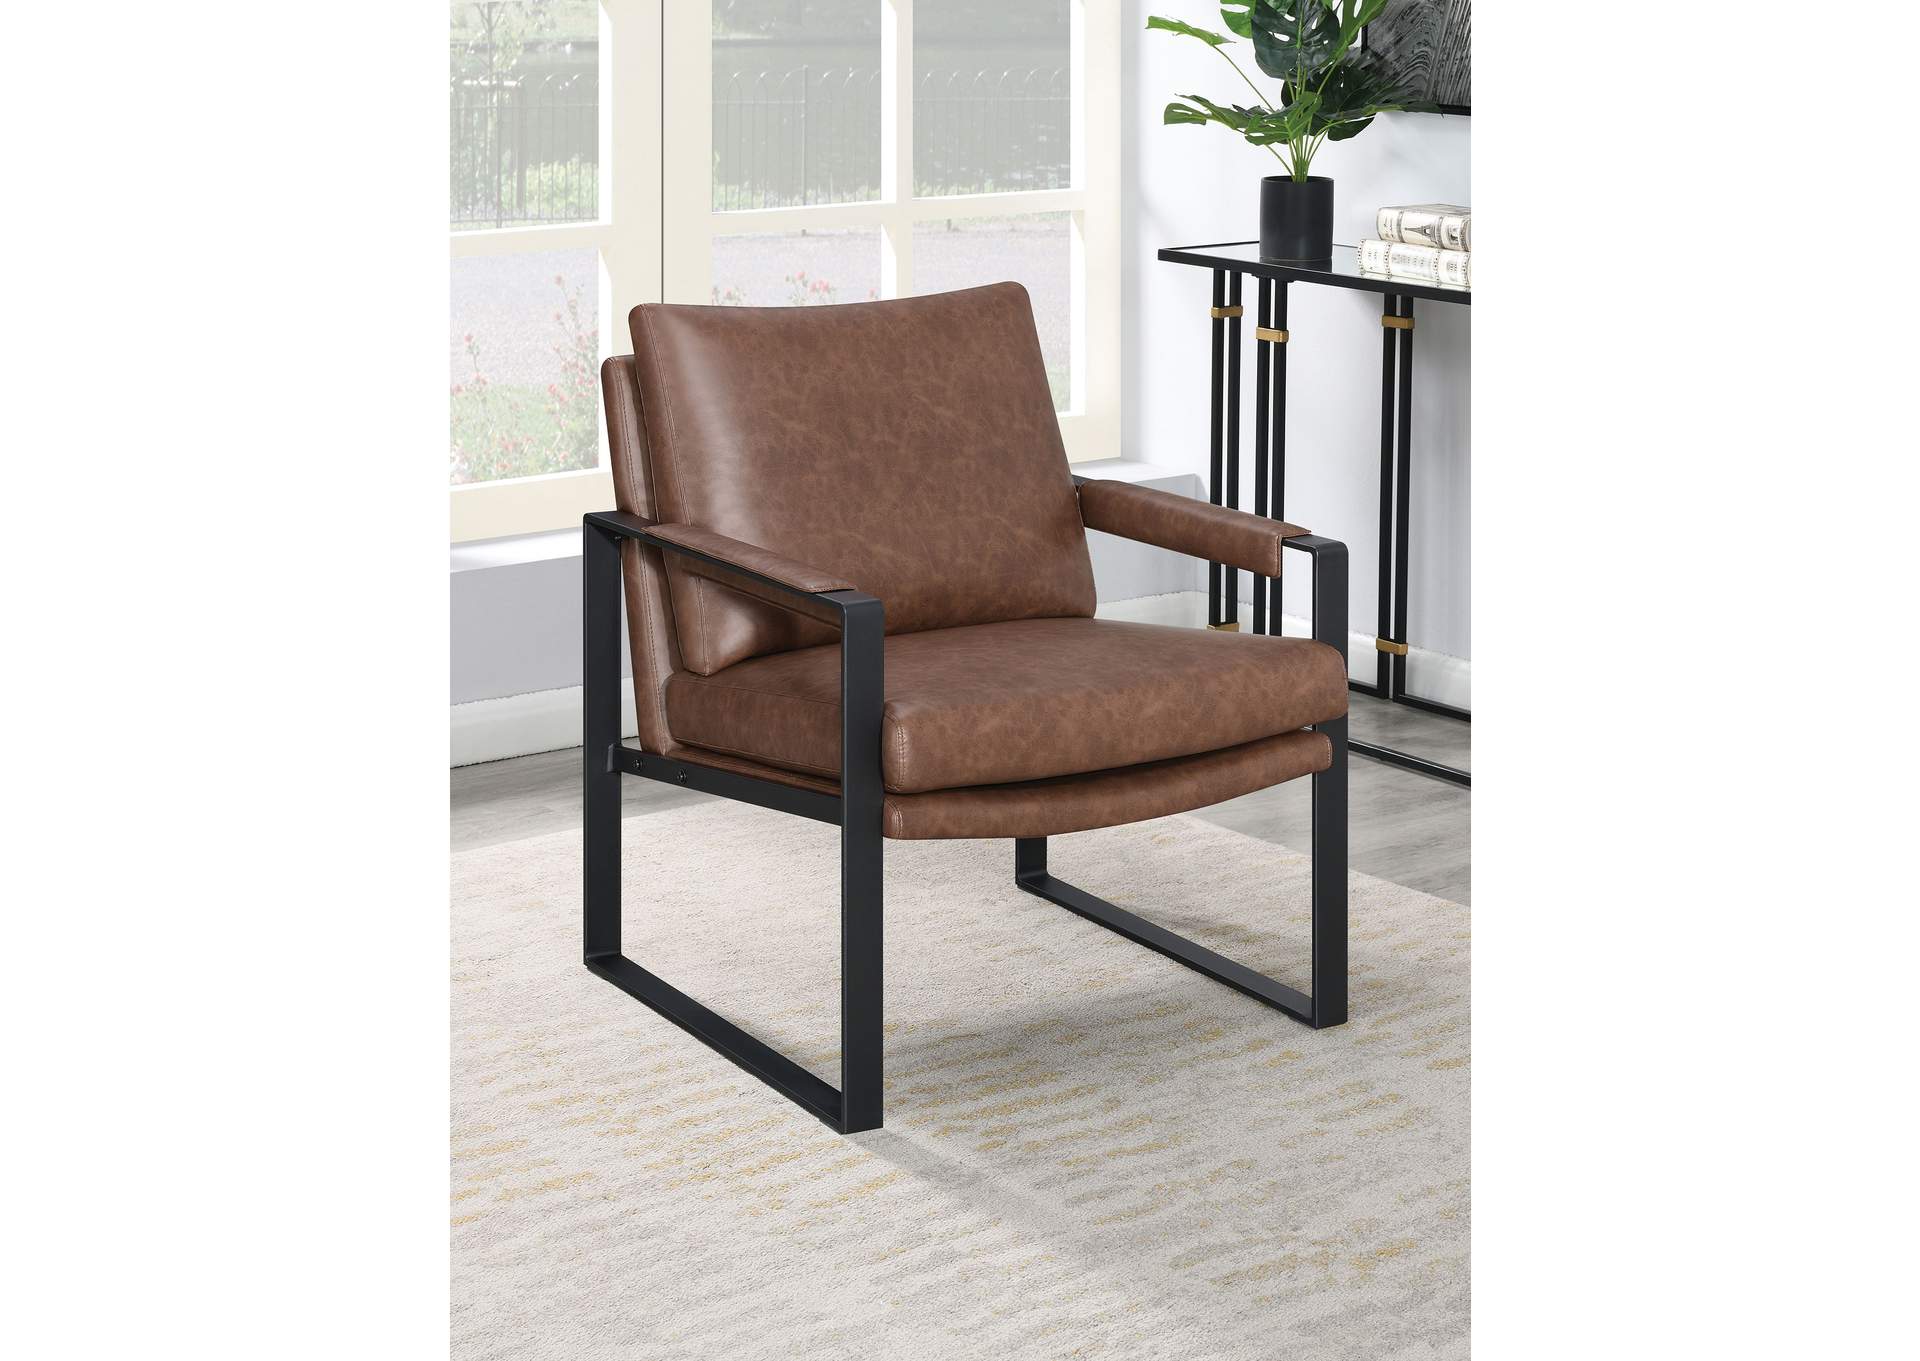 Rosalind Upholstered Accent Chair with Removable Cushion Umber Brown and Gunmetal,Coaster Furniture